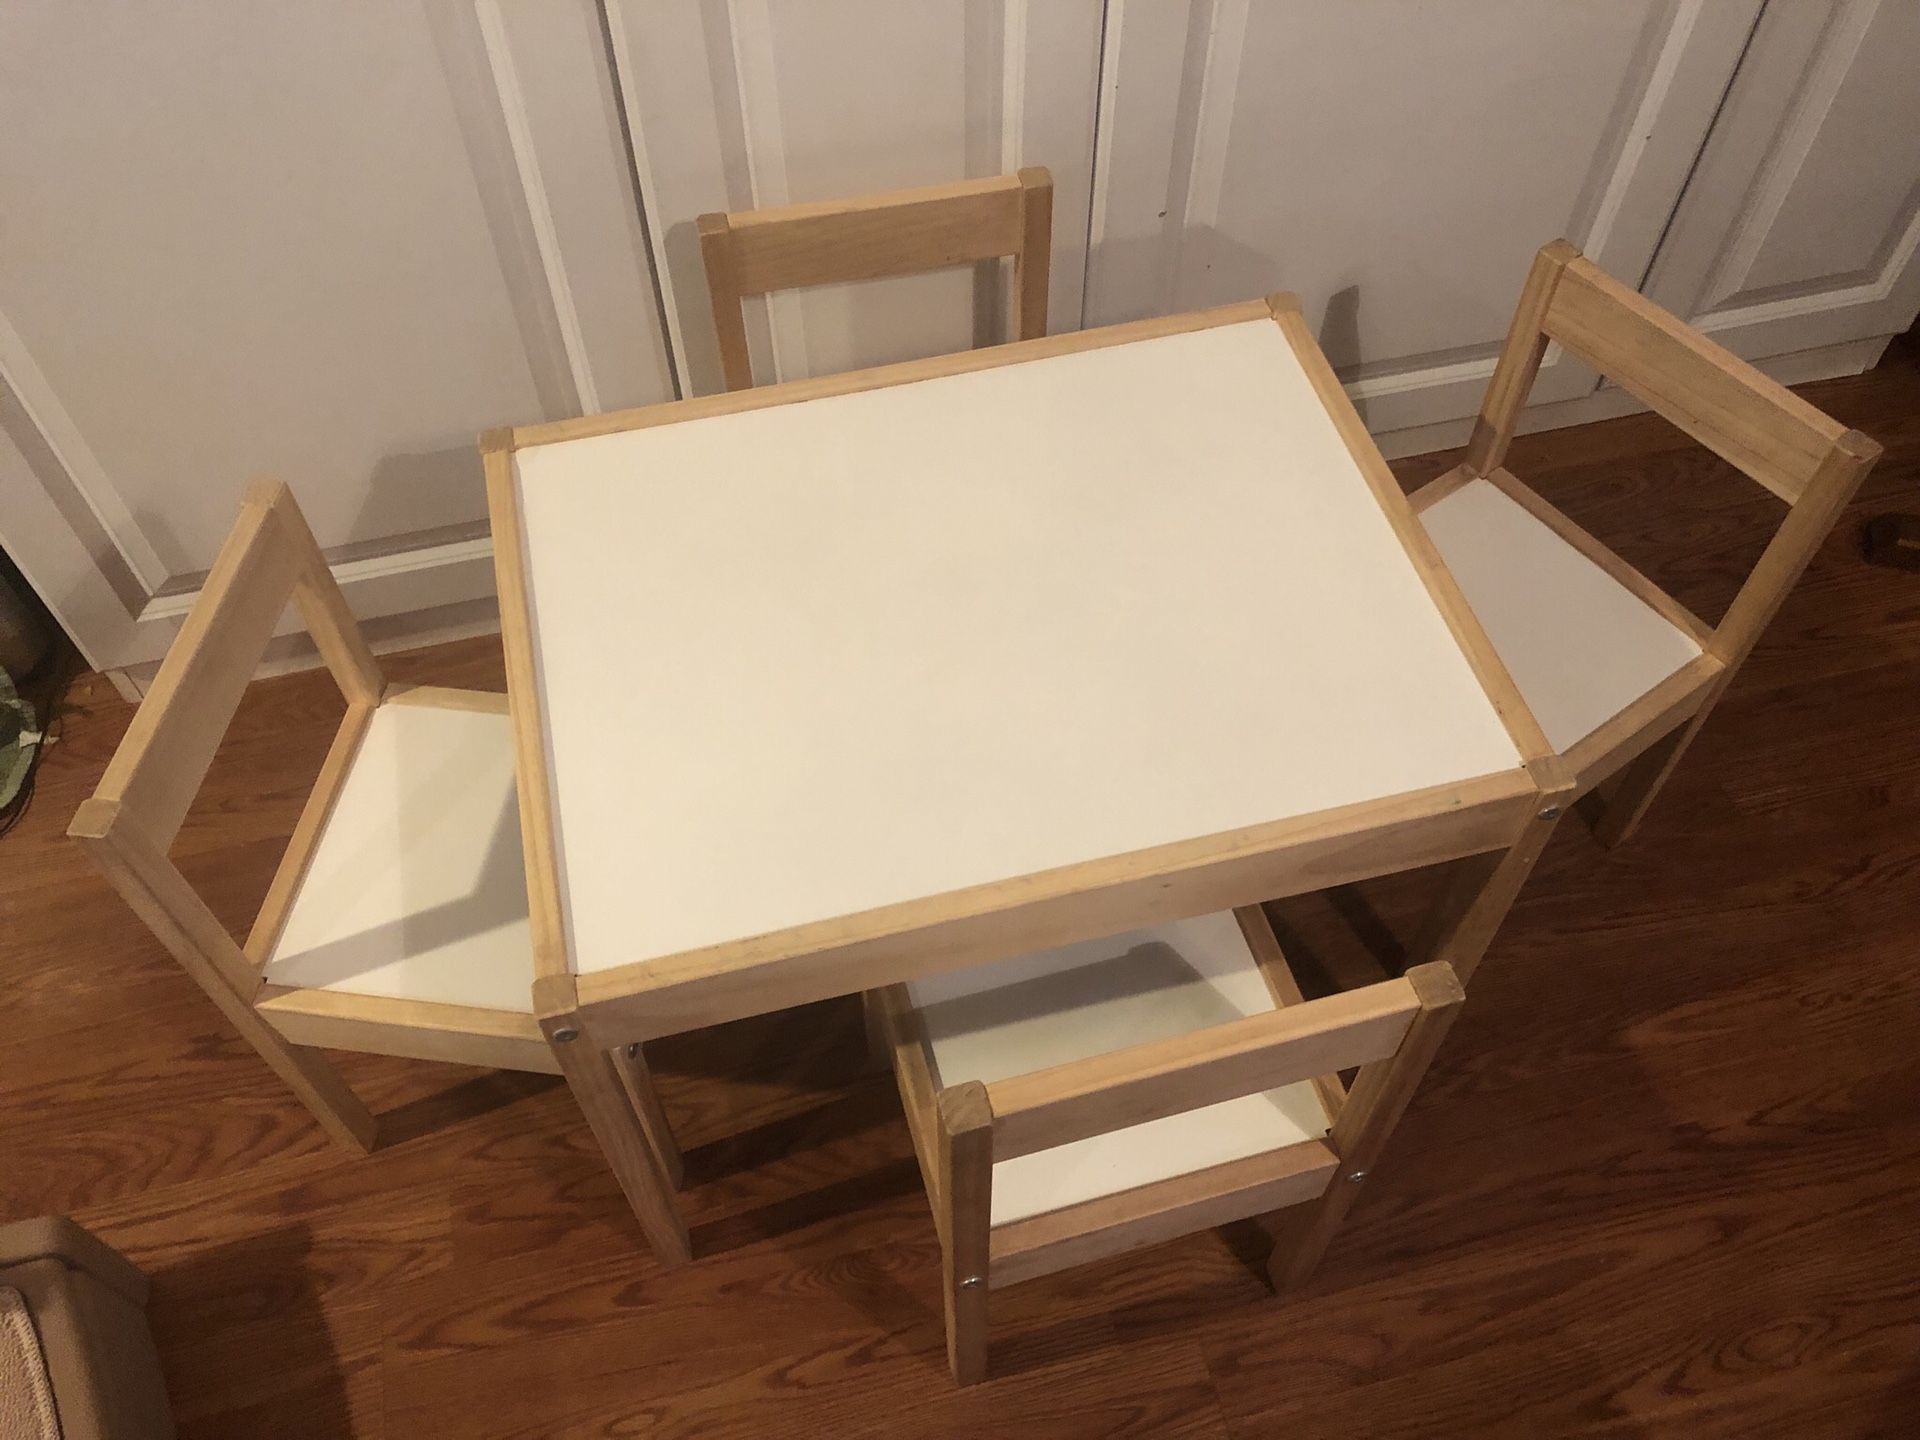 Kids table and chairs set, table measures 18” tall, 25” long, 19” wide